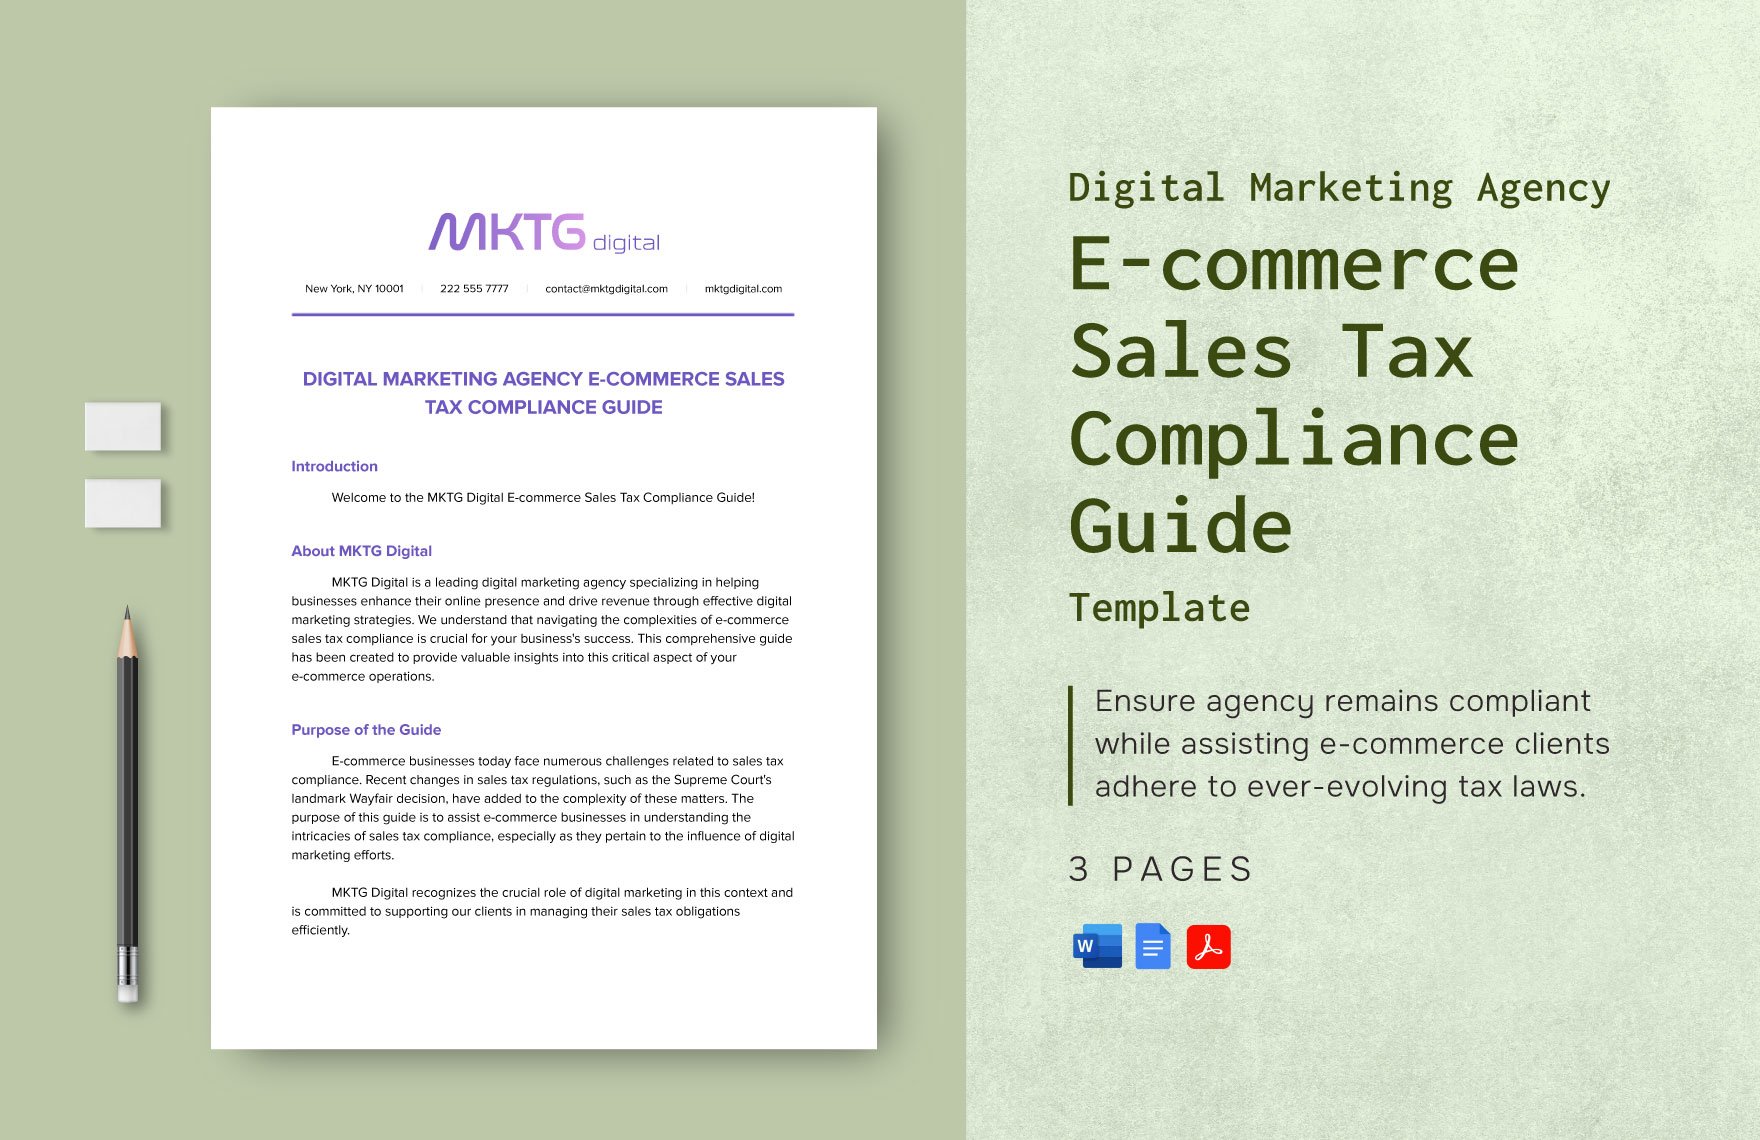 Digital Marketing Agency E-commerce Sales Tax Compliance Guide Template